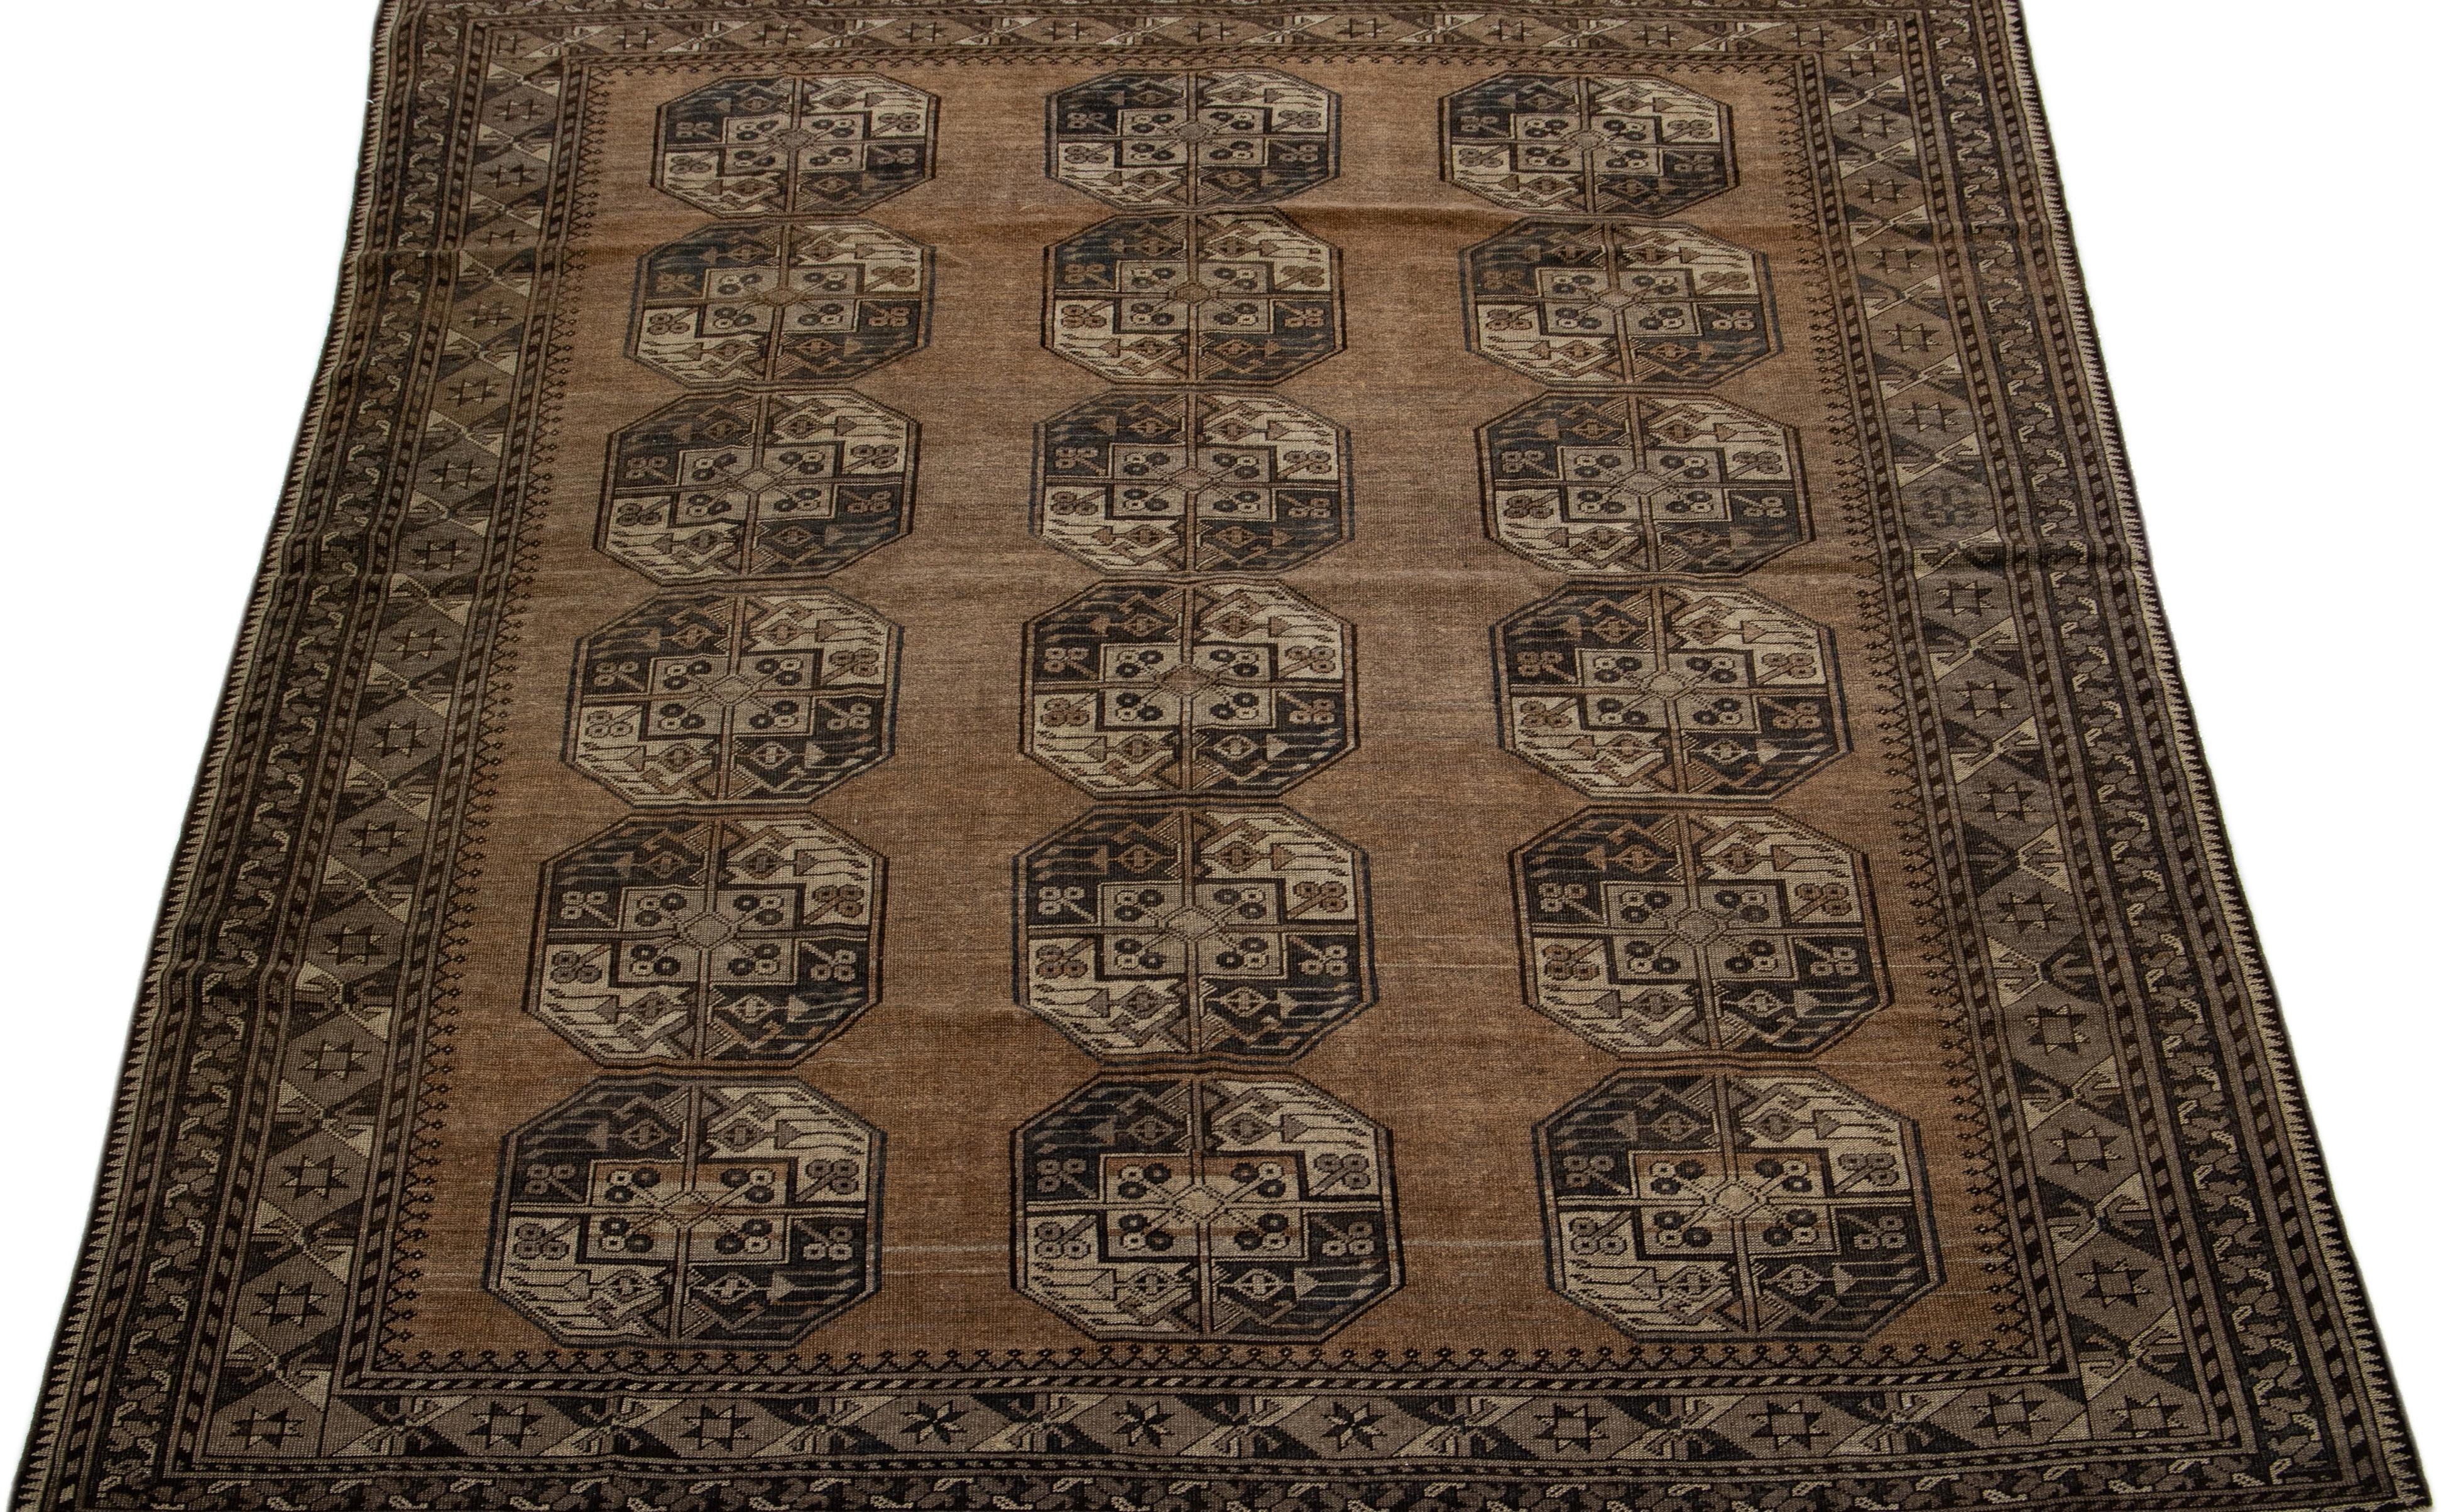 Beautiful antique Turkmen hand-knotted wool rug with a brown color field. This Persian piece has a gorgeous Gul pattern design in beige and gray.

This rug measures: 7'2